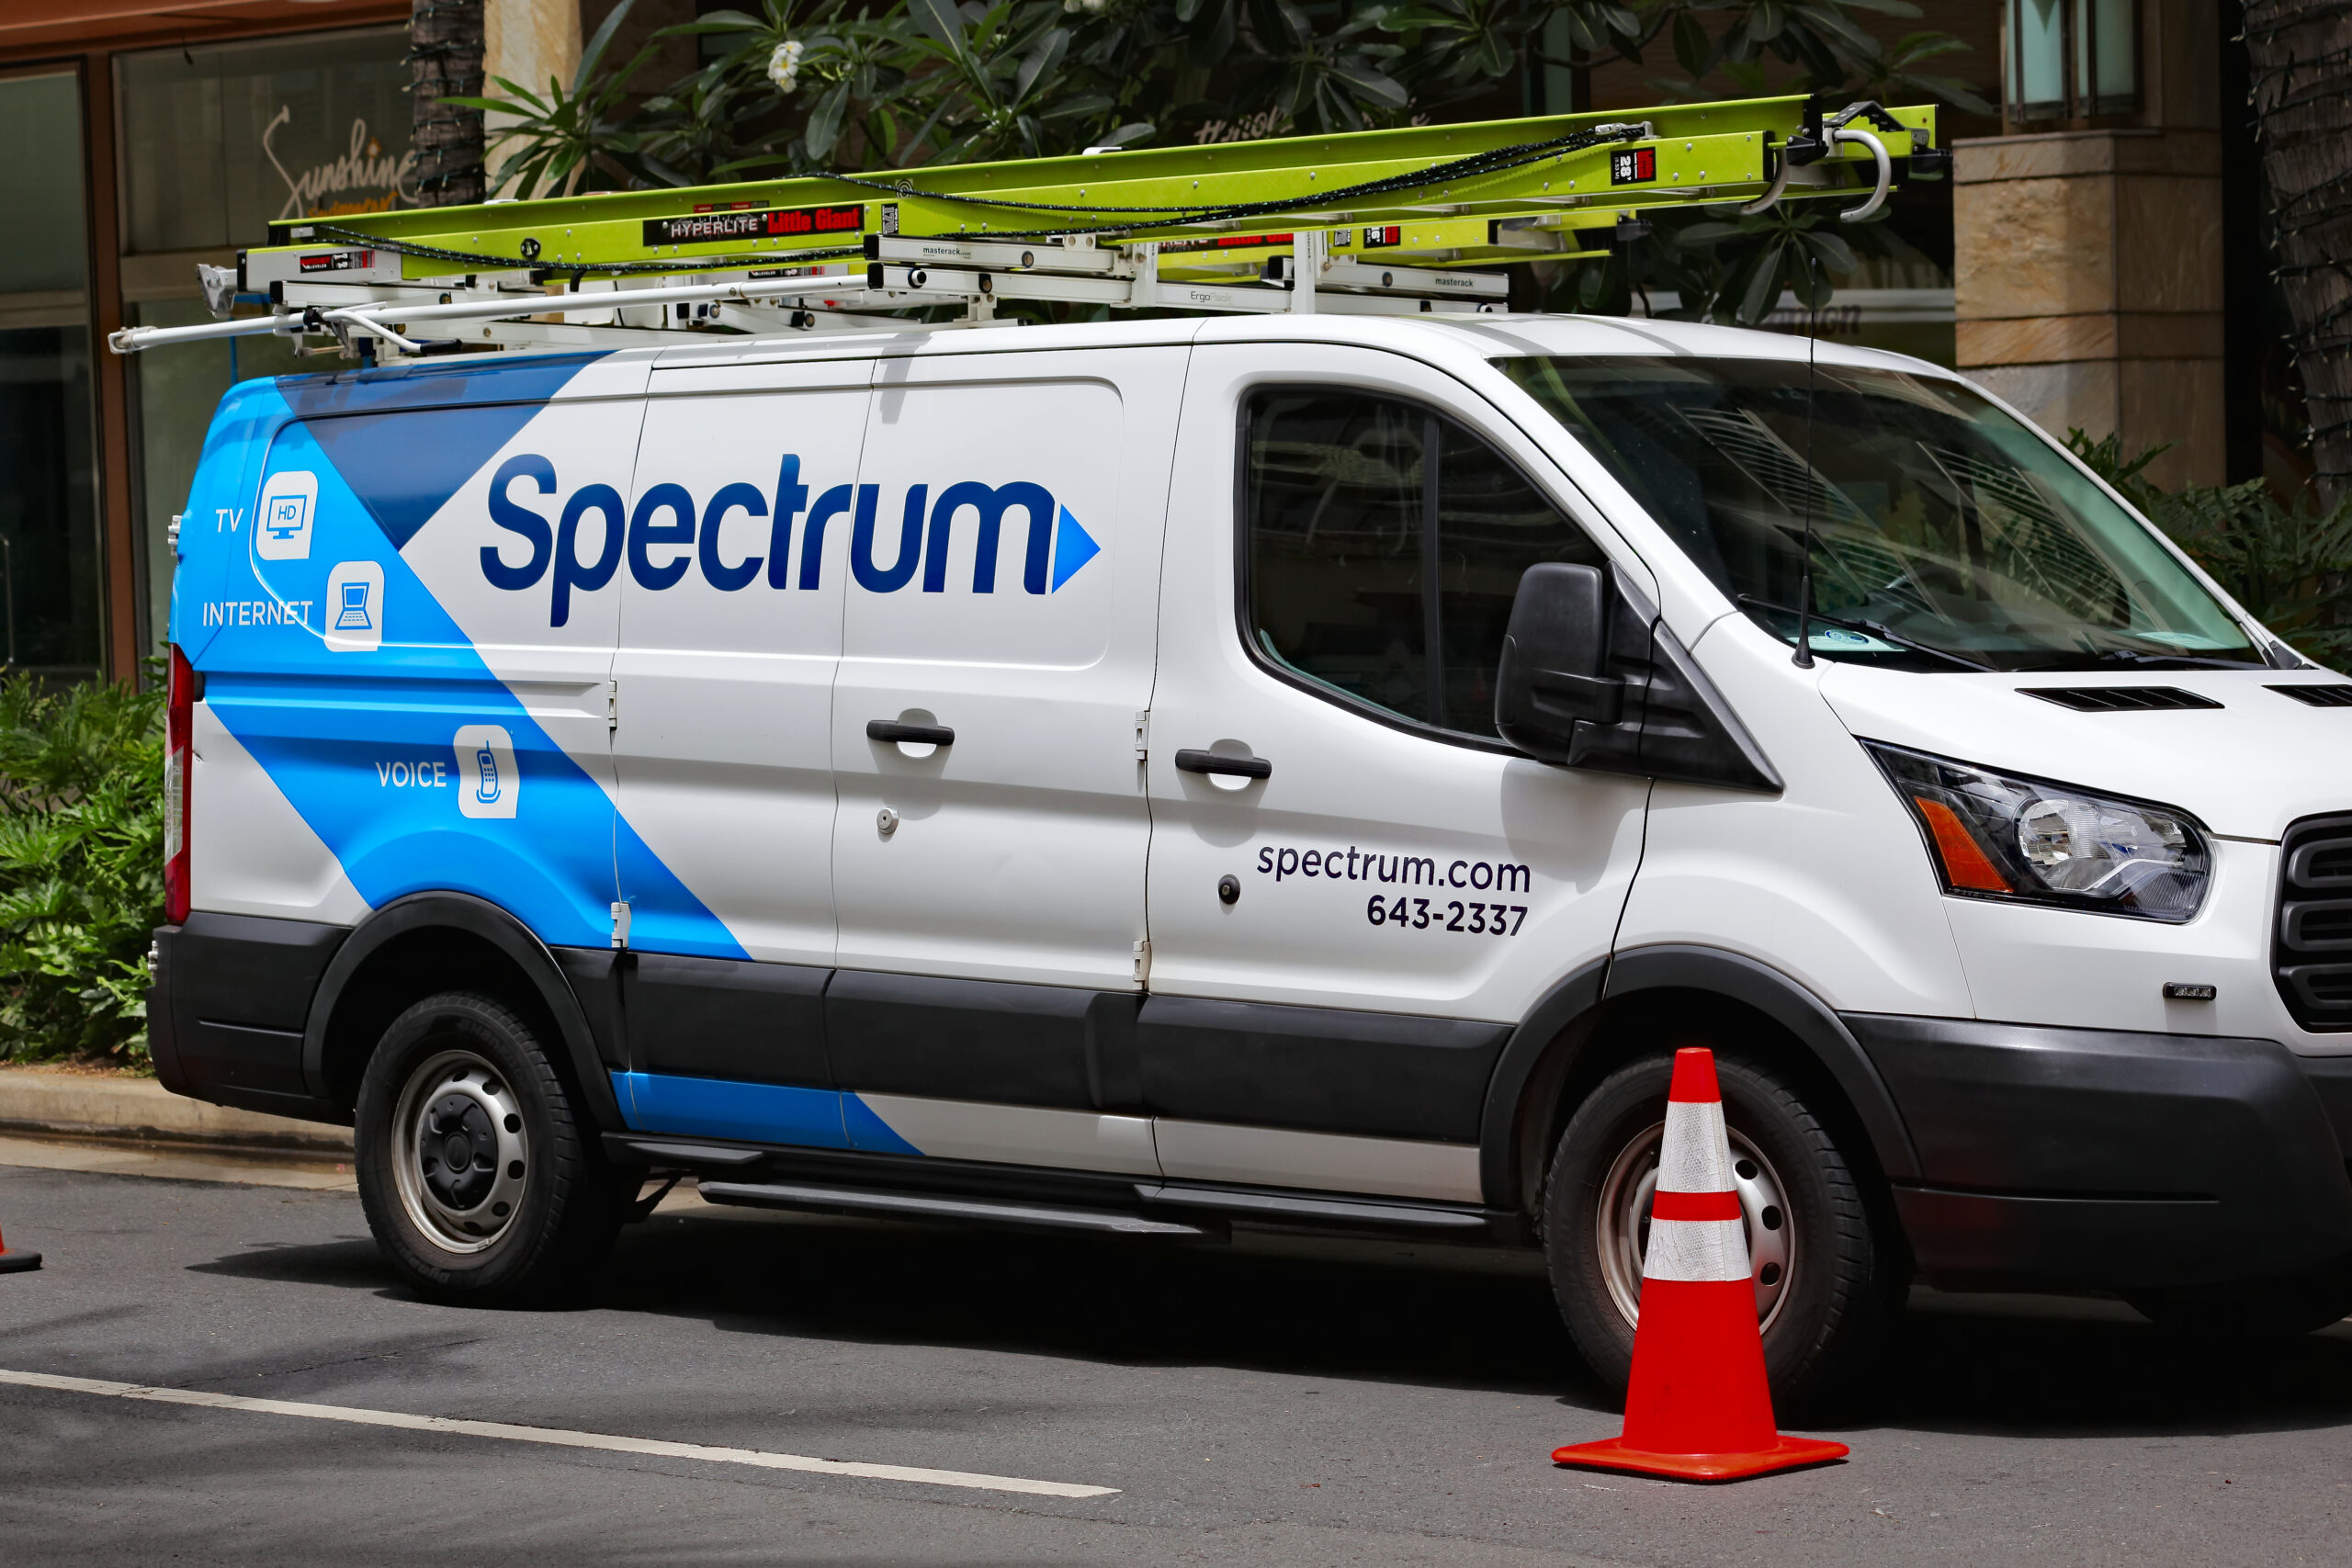 Millions of Spectrum Subscribers Demonstrate the Impact of Pricing Increases on the Organization